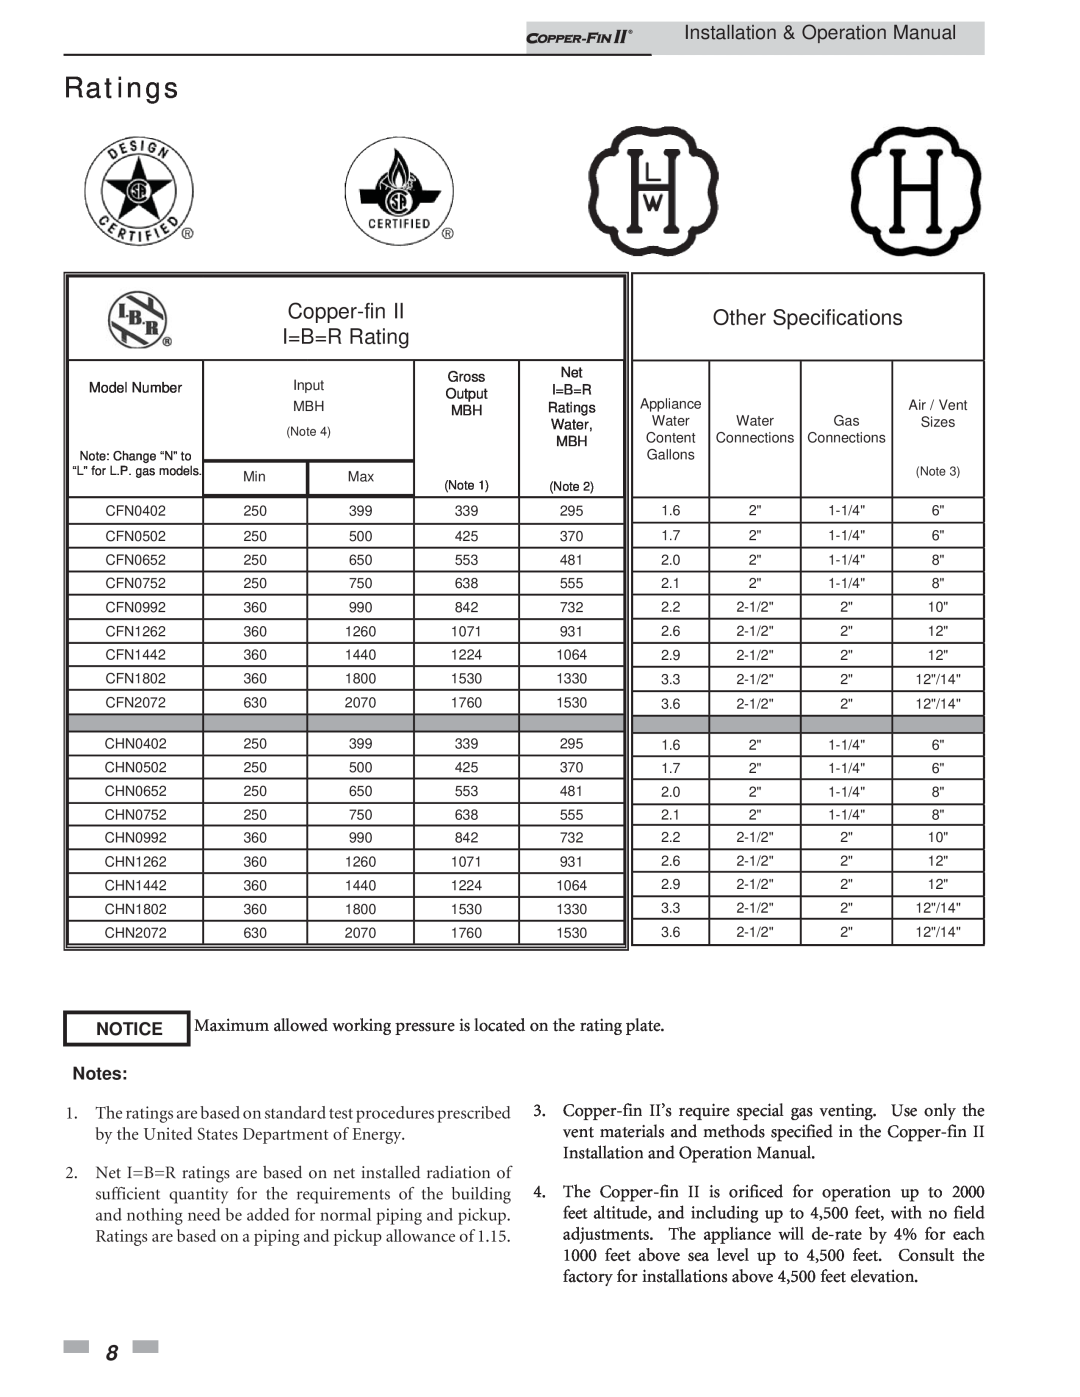 Lochinvar 402 - 2072 operation manual Ratings, NOTICE Notes, Copper-finII I=B=R Rating, Other Specifications 